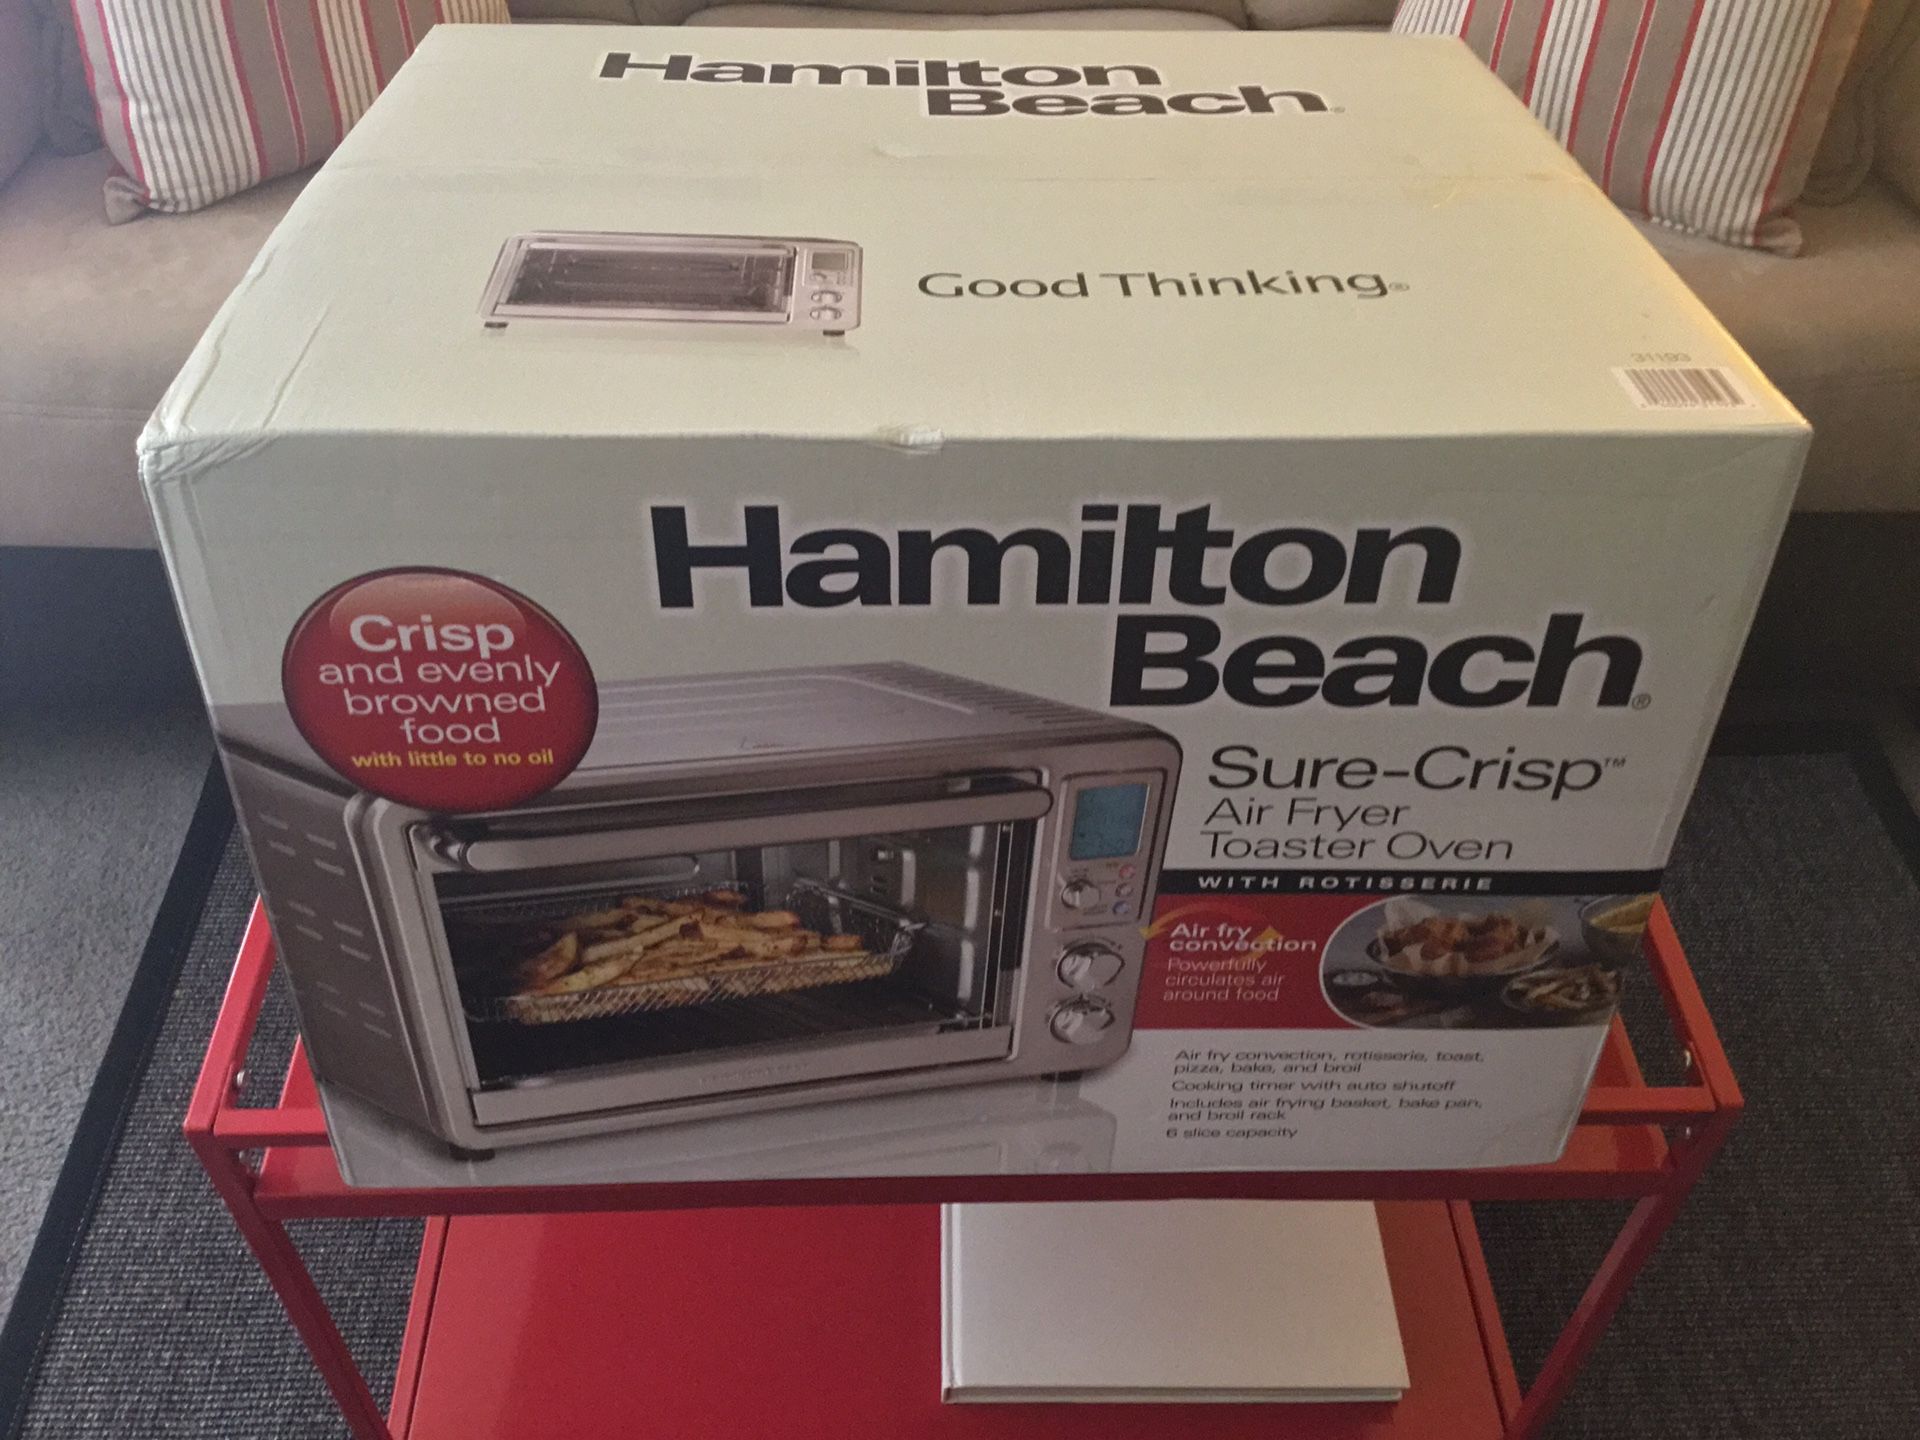 Brand New! Hamilton Beach Sure Crisp Air Fryer Toaster Oven with Rotisserie (SEE ALL 6 PHOTOS)